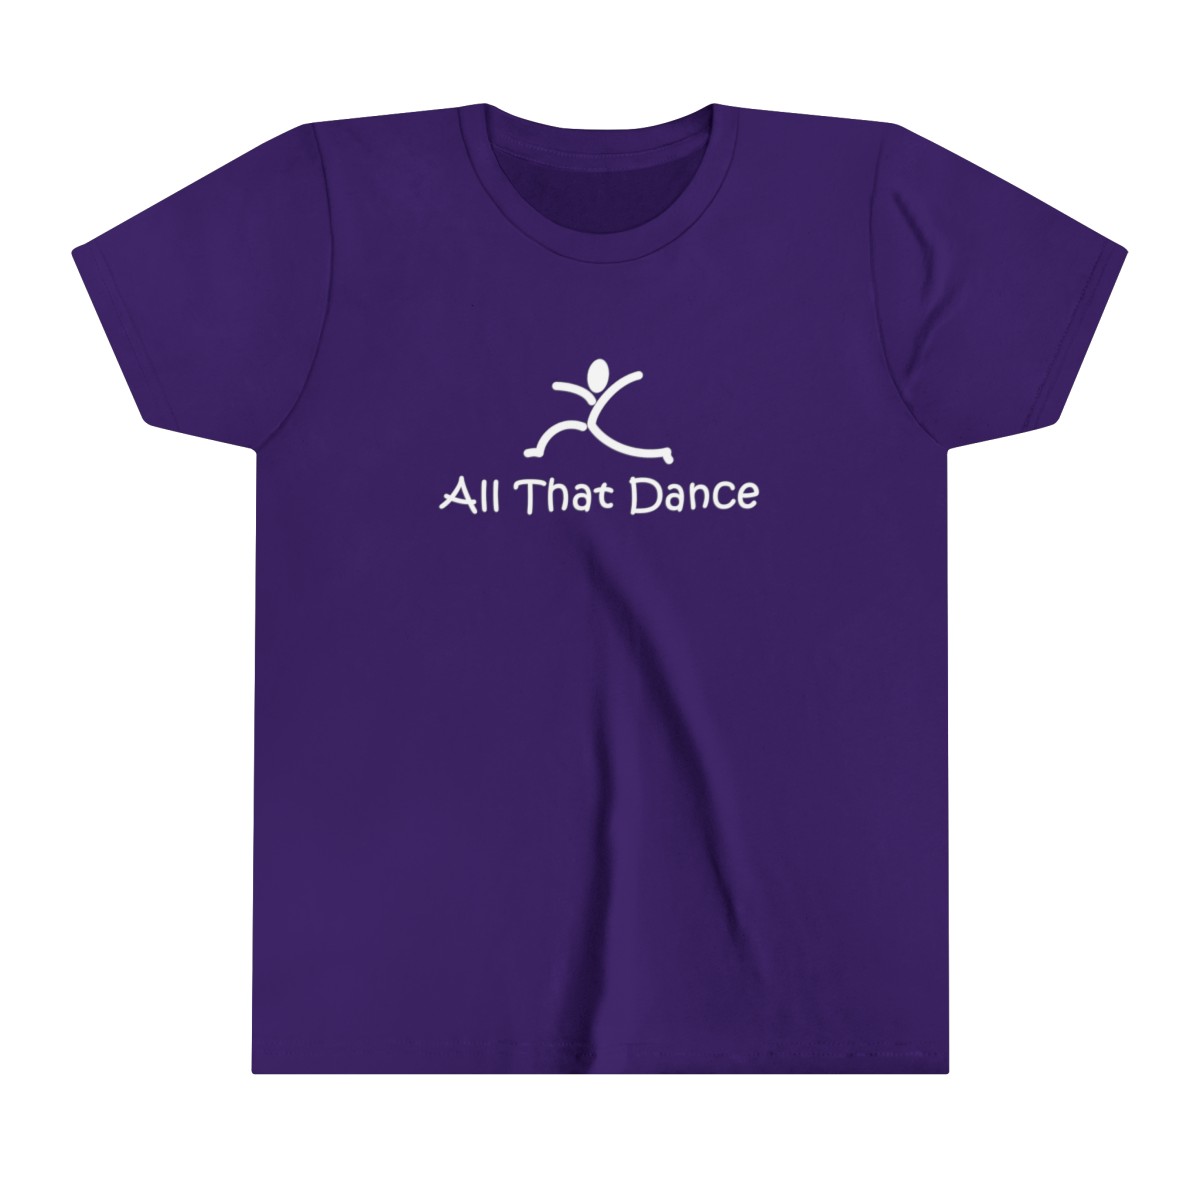 Youth Sizes - -ll That Dance Tshirts product main image